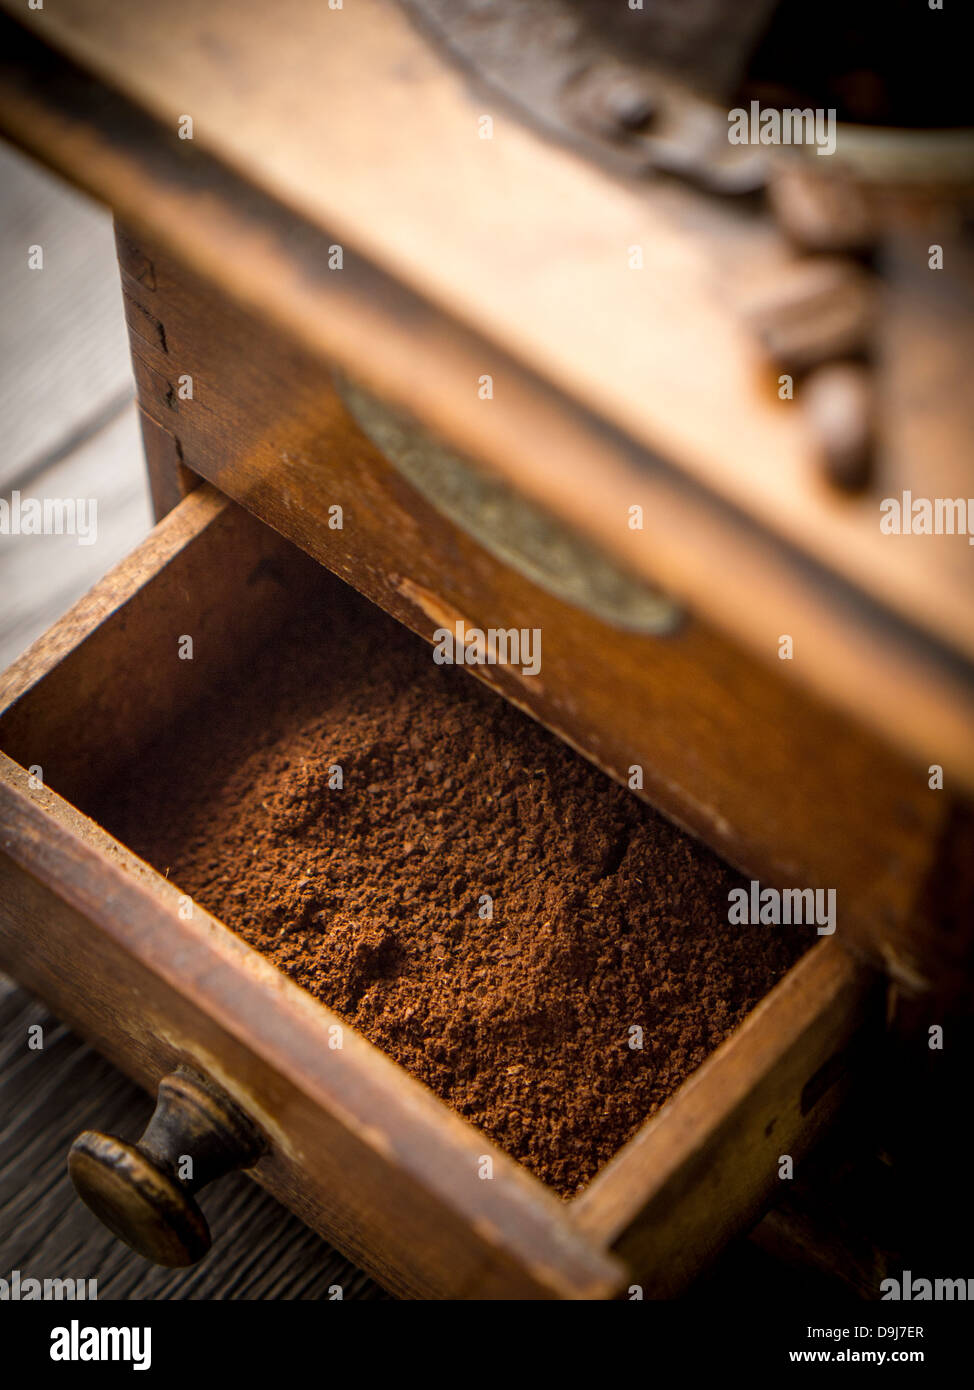 Grind coffee beans in an old wooden coffee grinder. Stock Photo